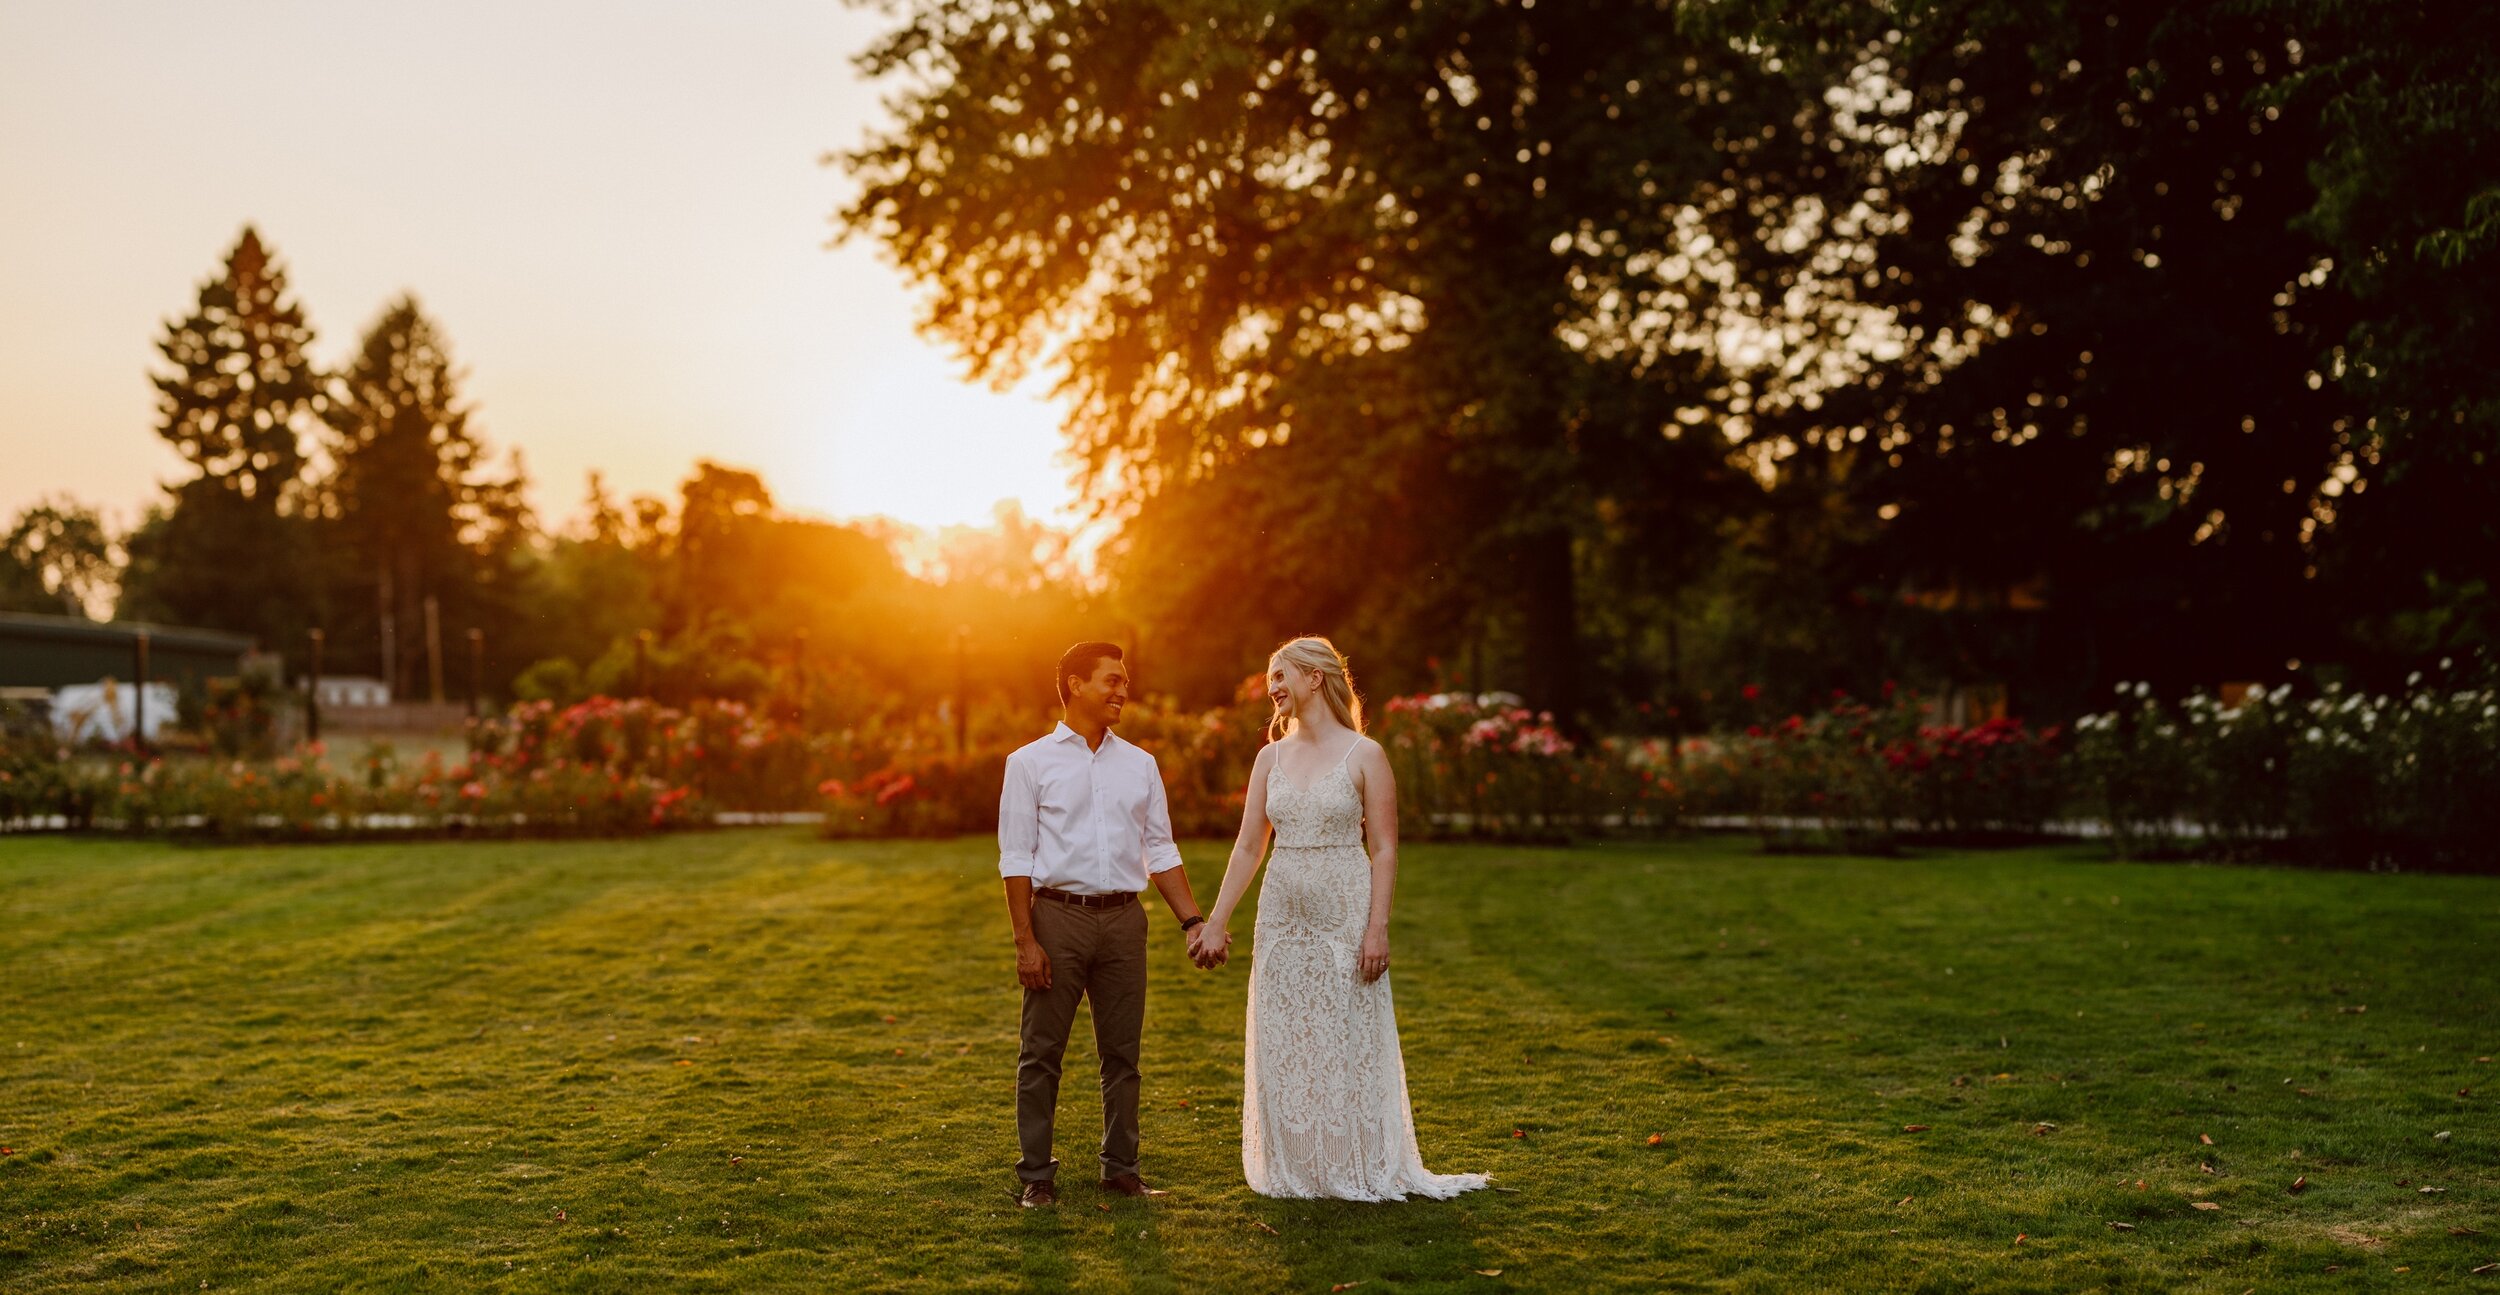 A bride and groom hold hands in a garden and smile at each other while a golden sun sets behind them